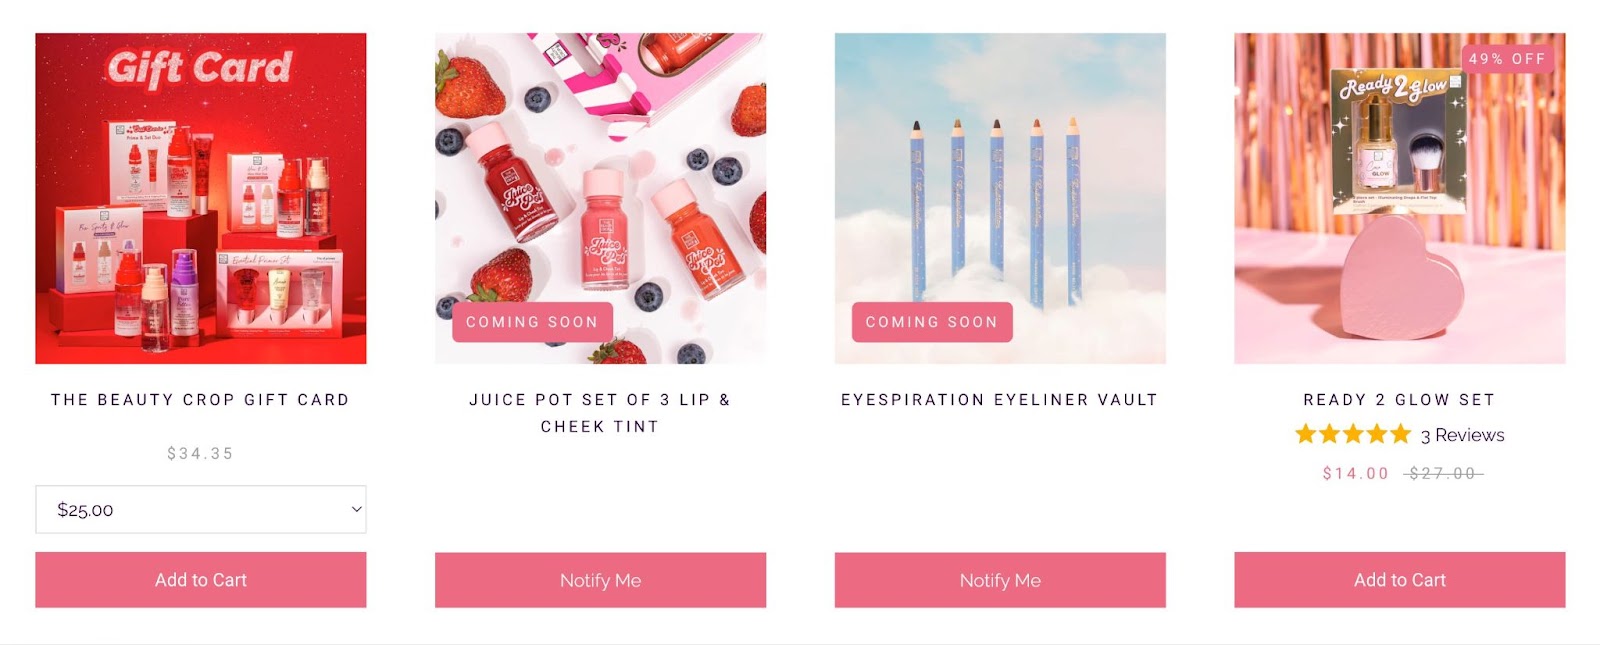 Screenshot of product bundles that are out of stock with a "Notify Me" CTA